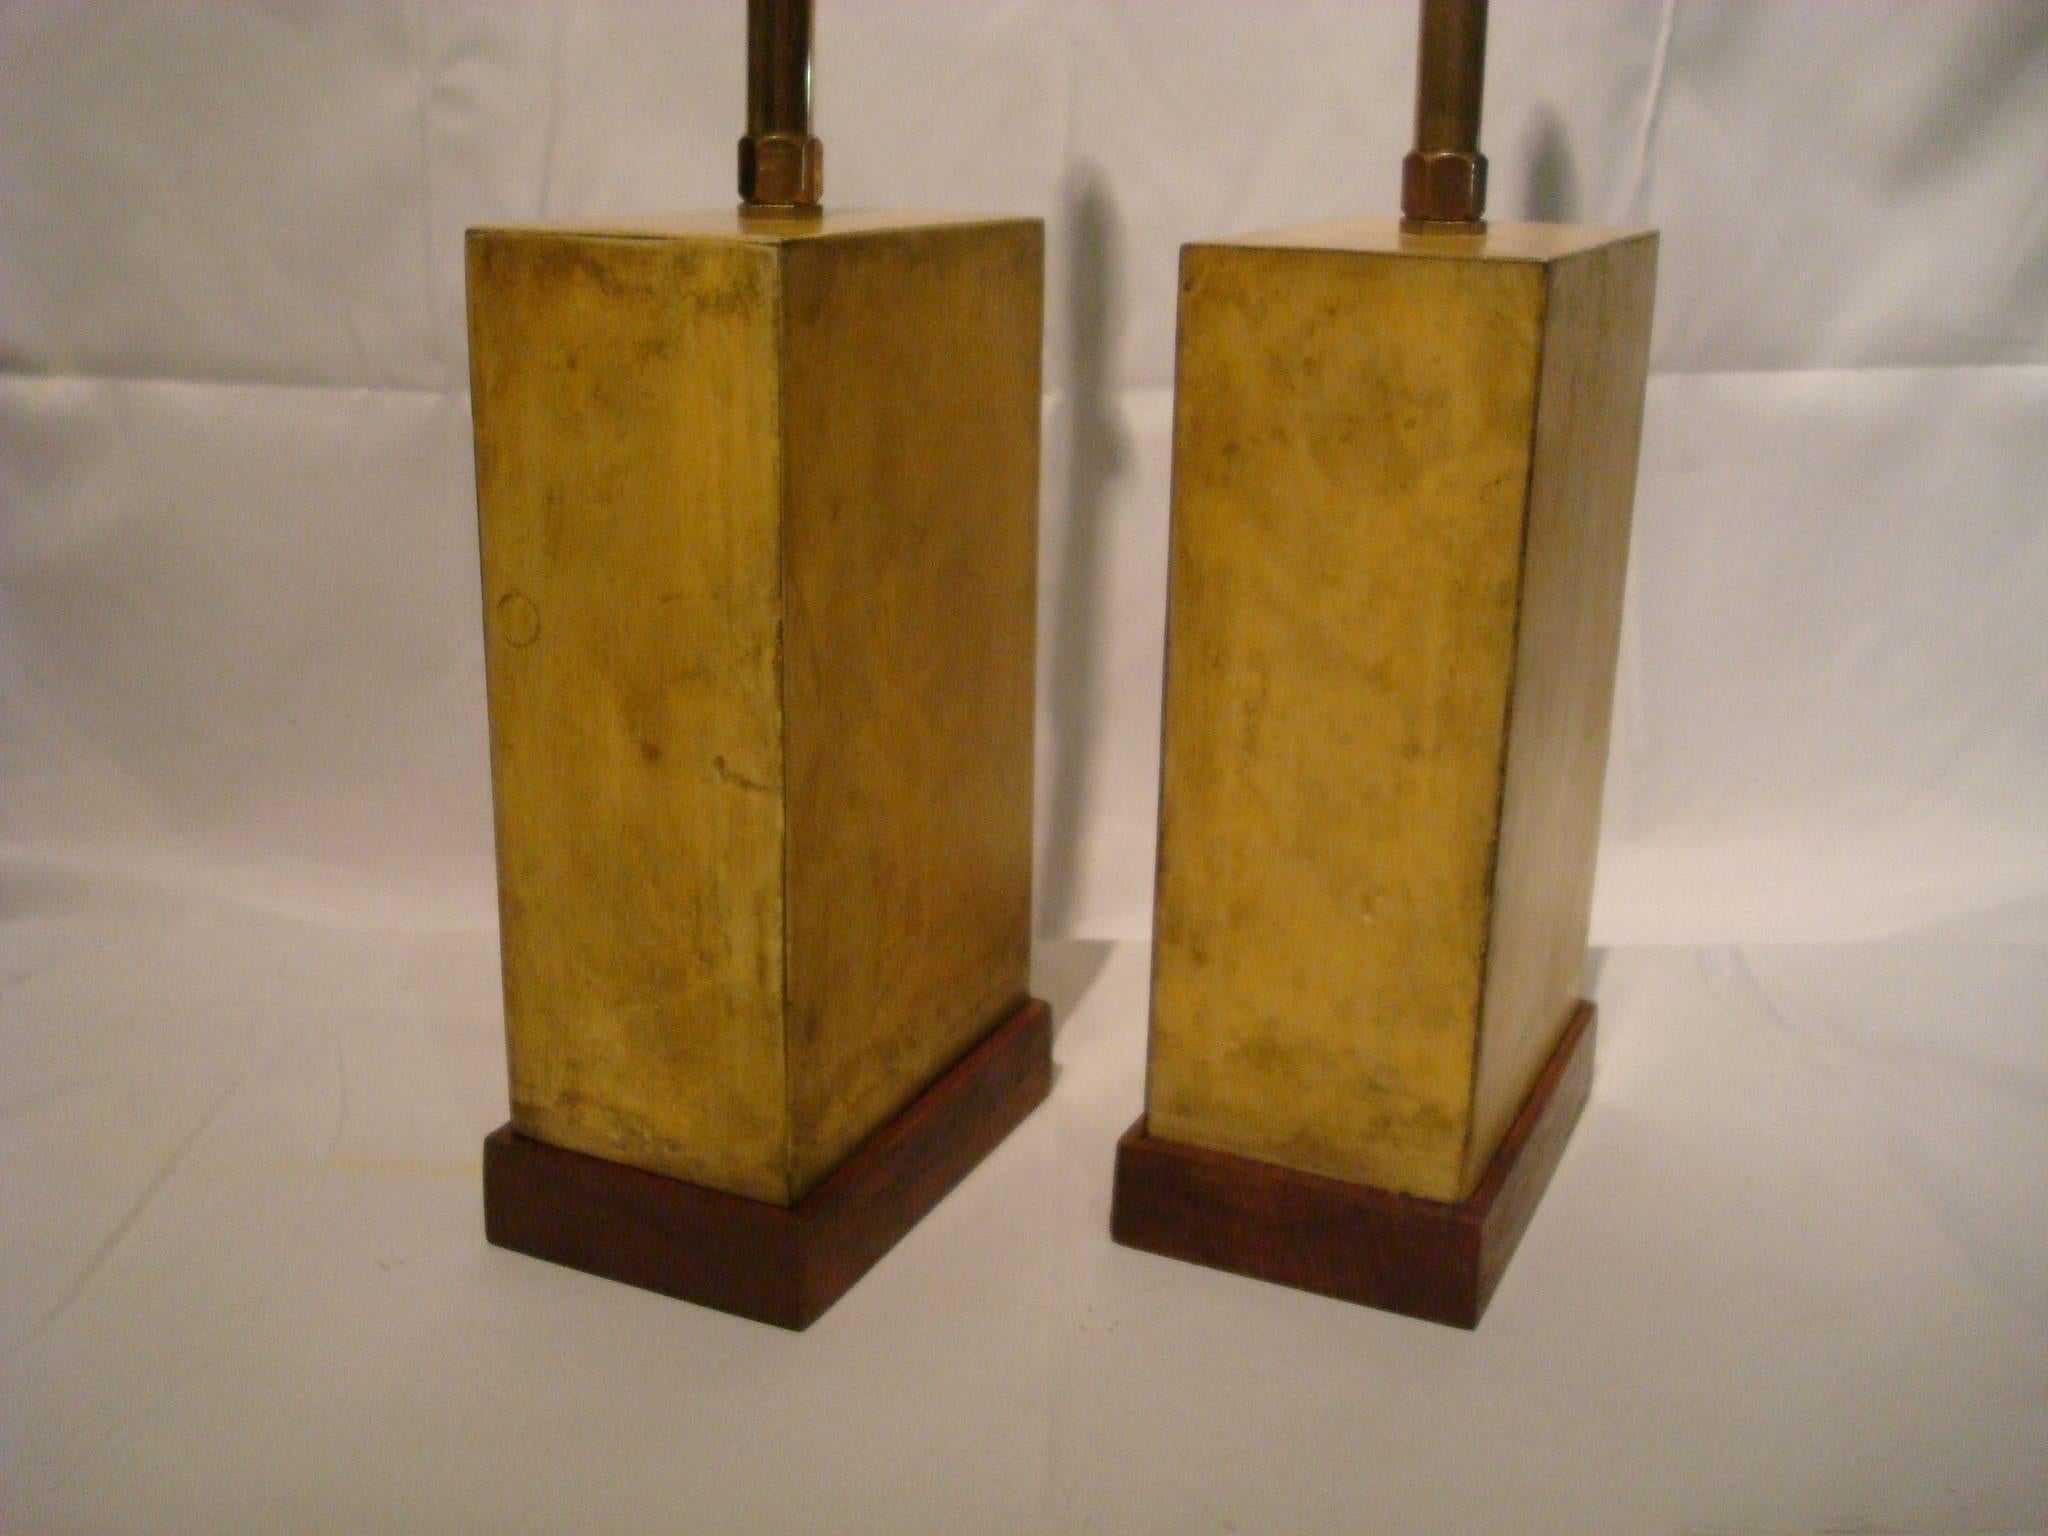 Pair of Art Deco parchment table lamps. Wooden made and covered with leather. Jacques Adnet. Made in France 1930s. They don´t have their original light fittings and cable, they can be replaced by new ones as request of the buyer. The overall height